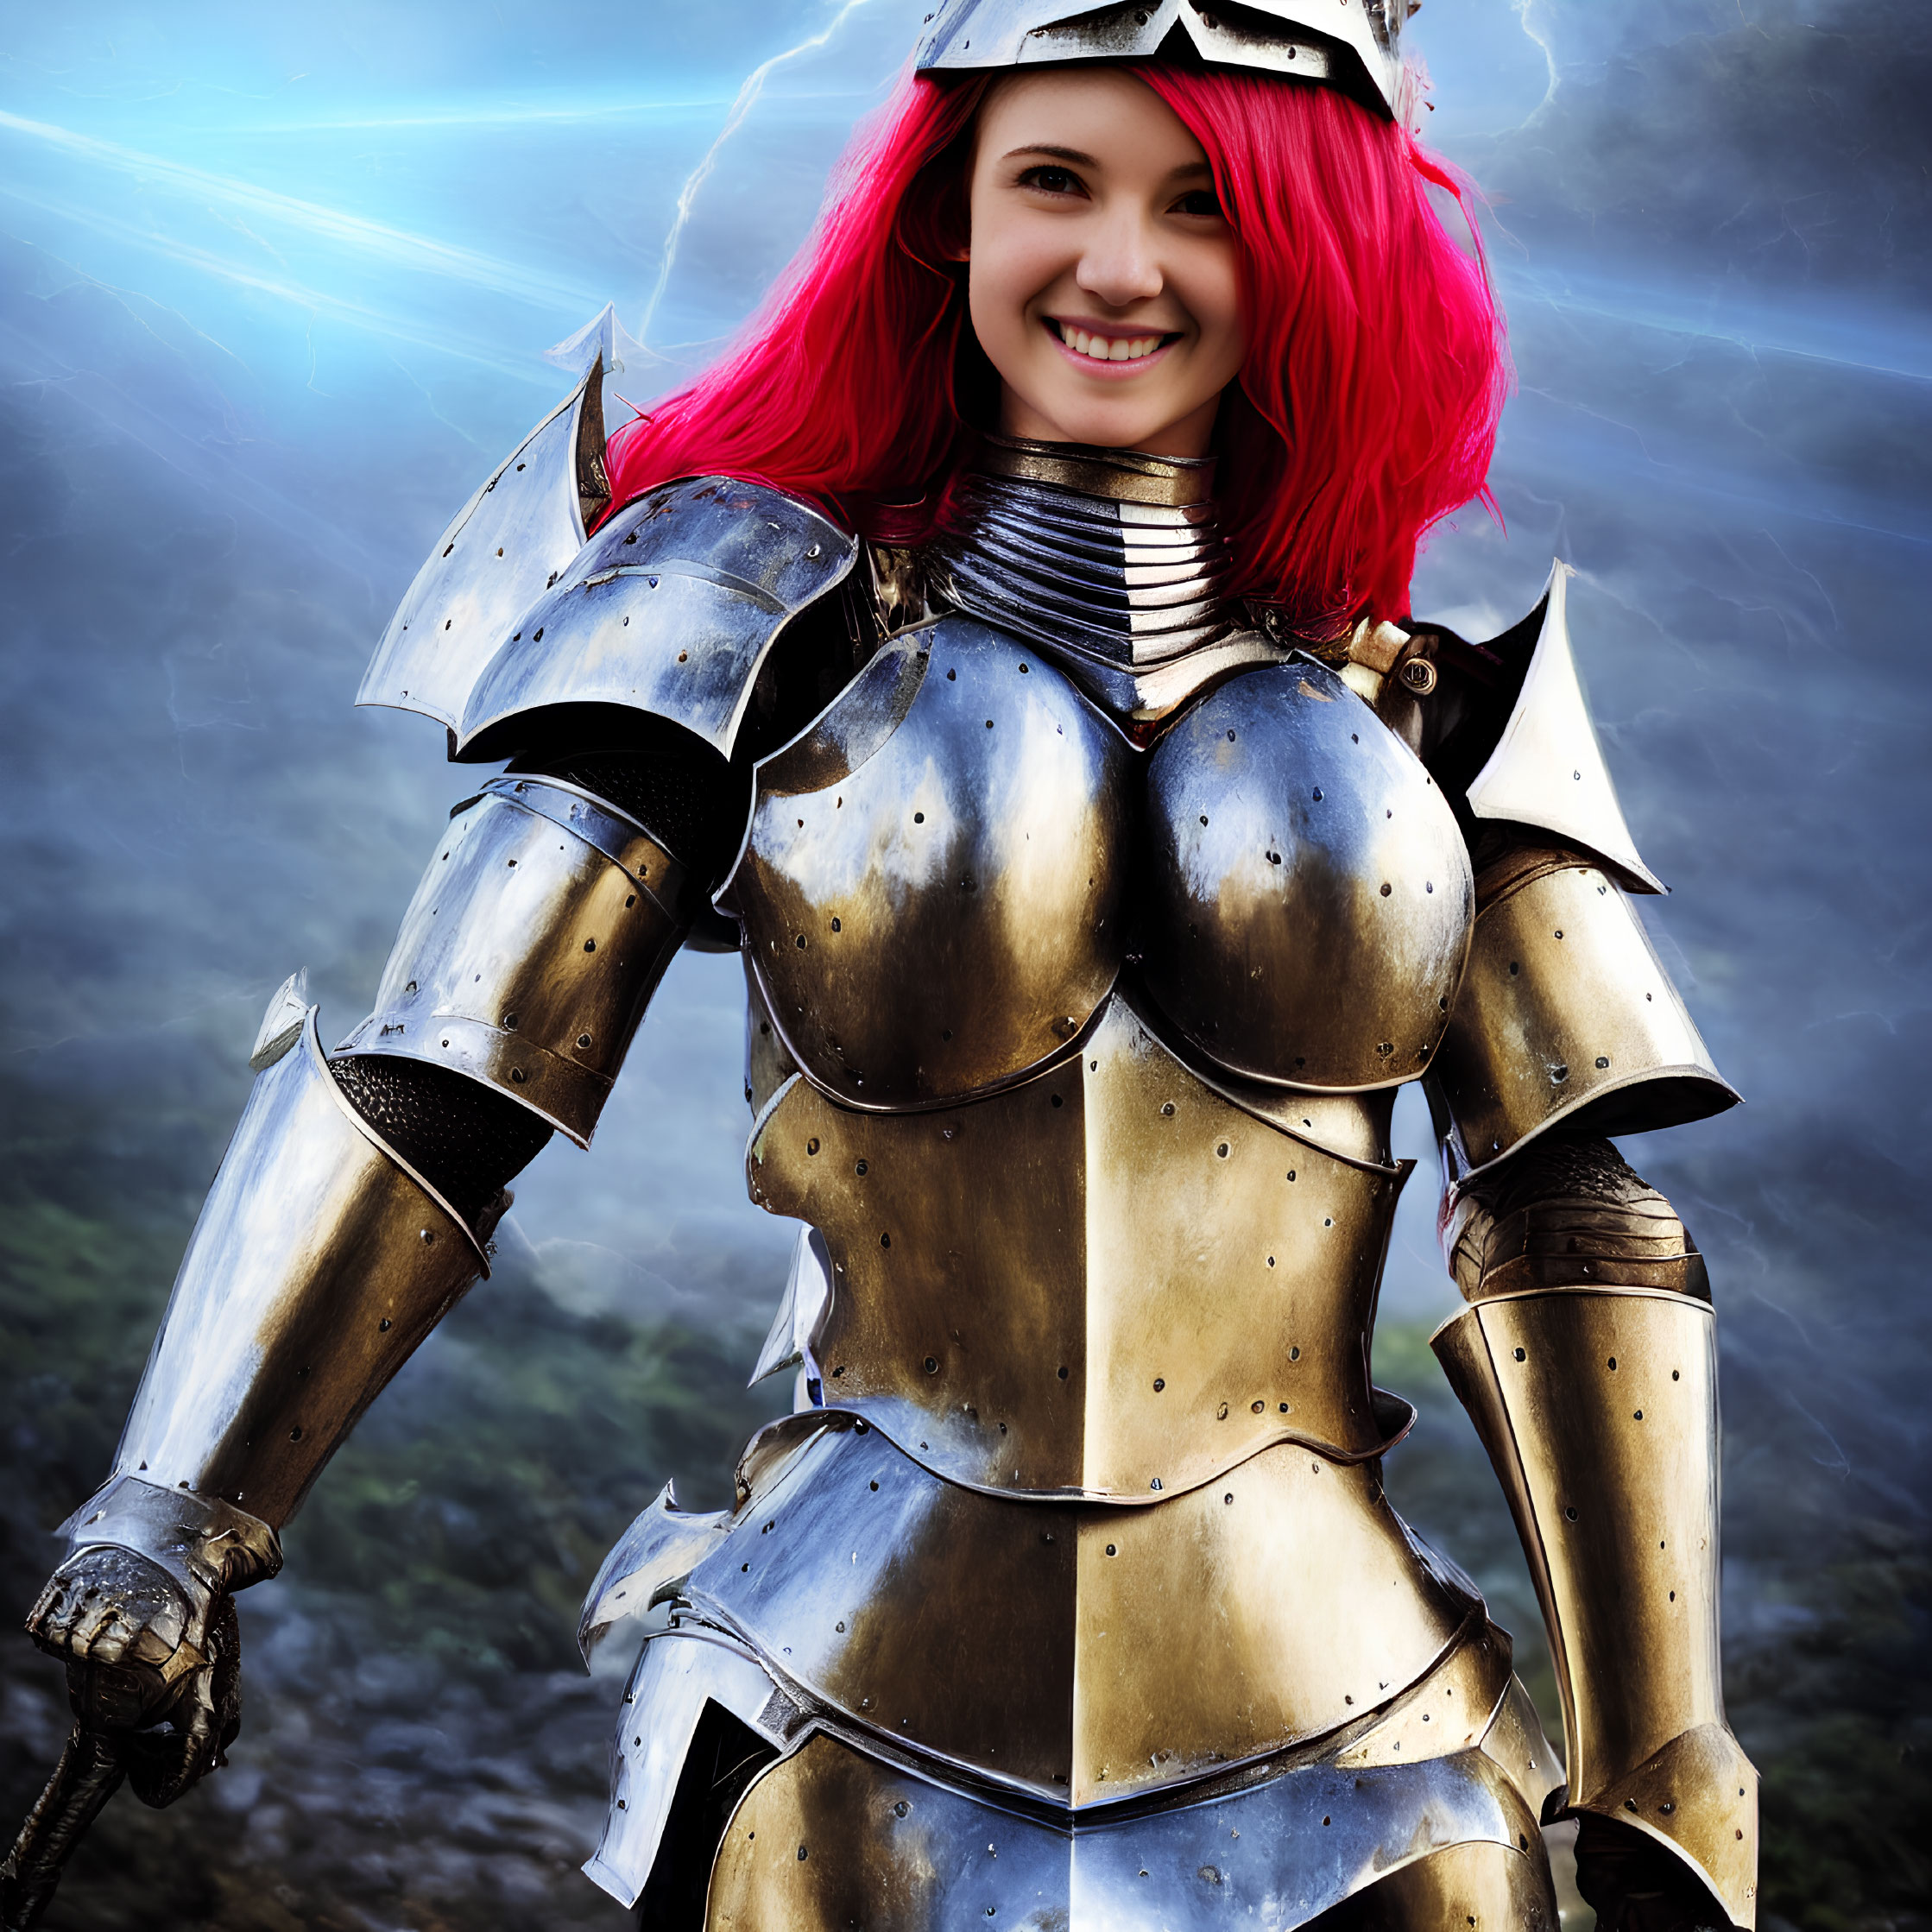 Person in Red Hair in Shiny Medieval Armor with Lightning Background